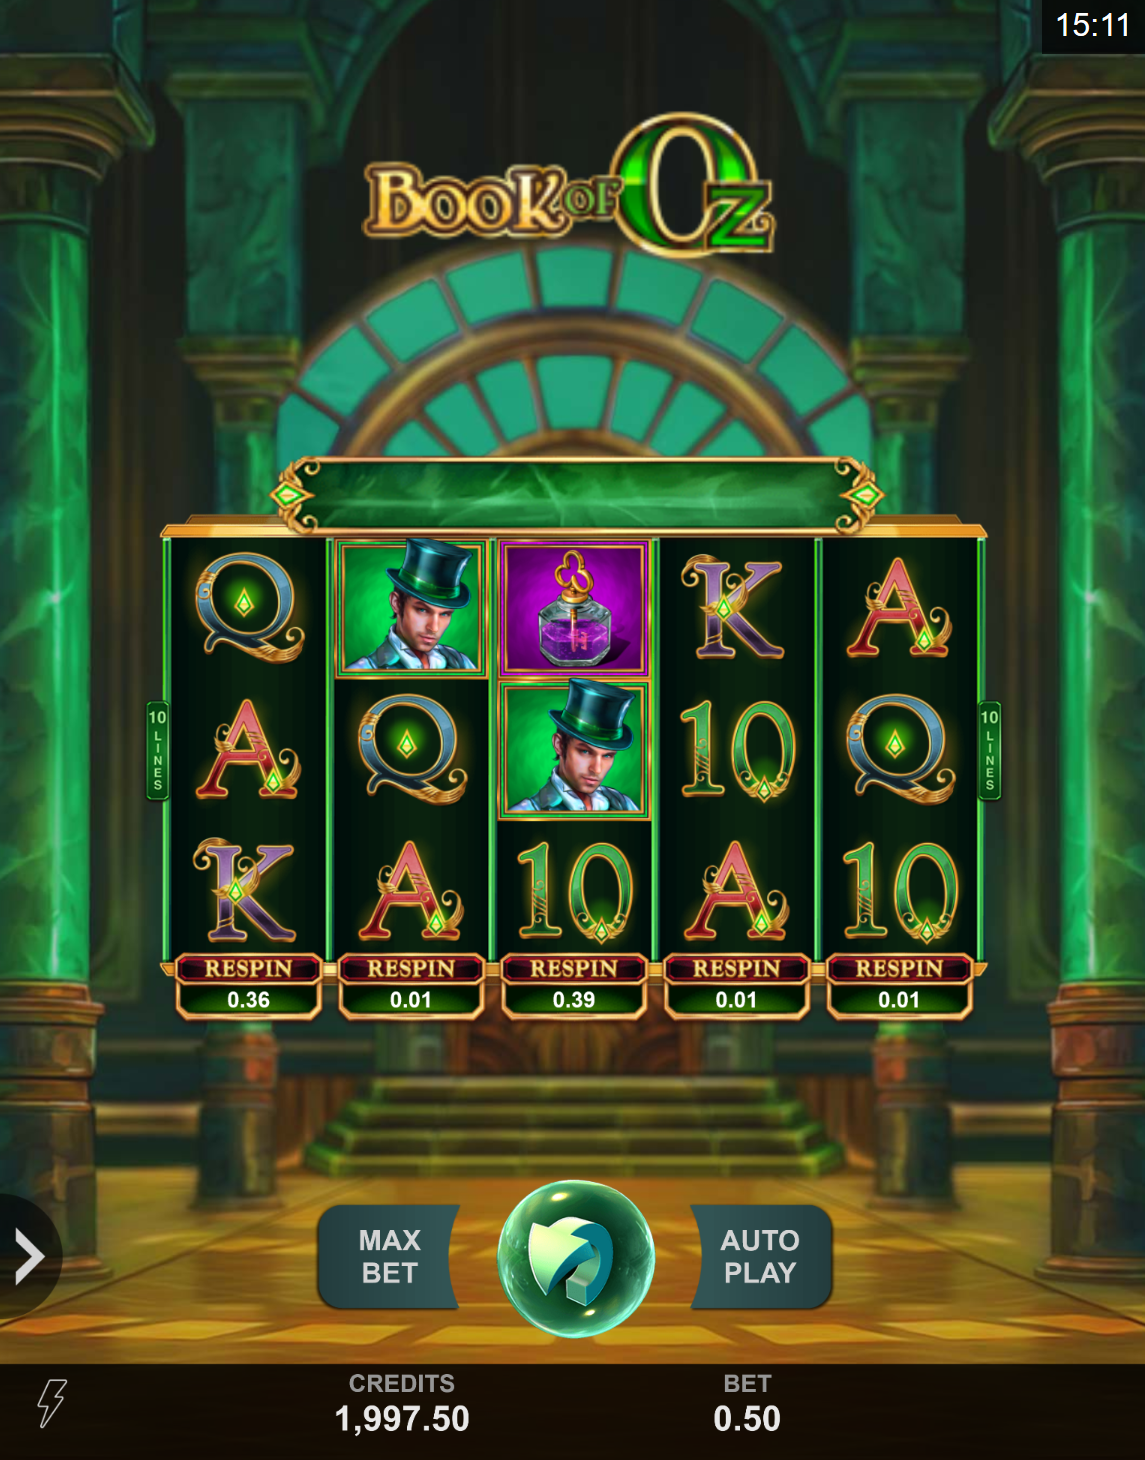 The new online casino slot Book of Oz being played on a tablet